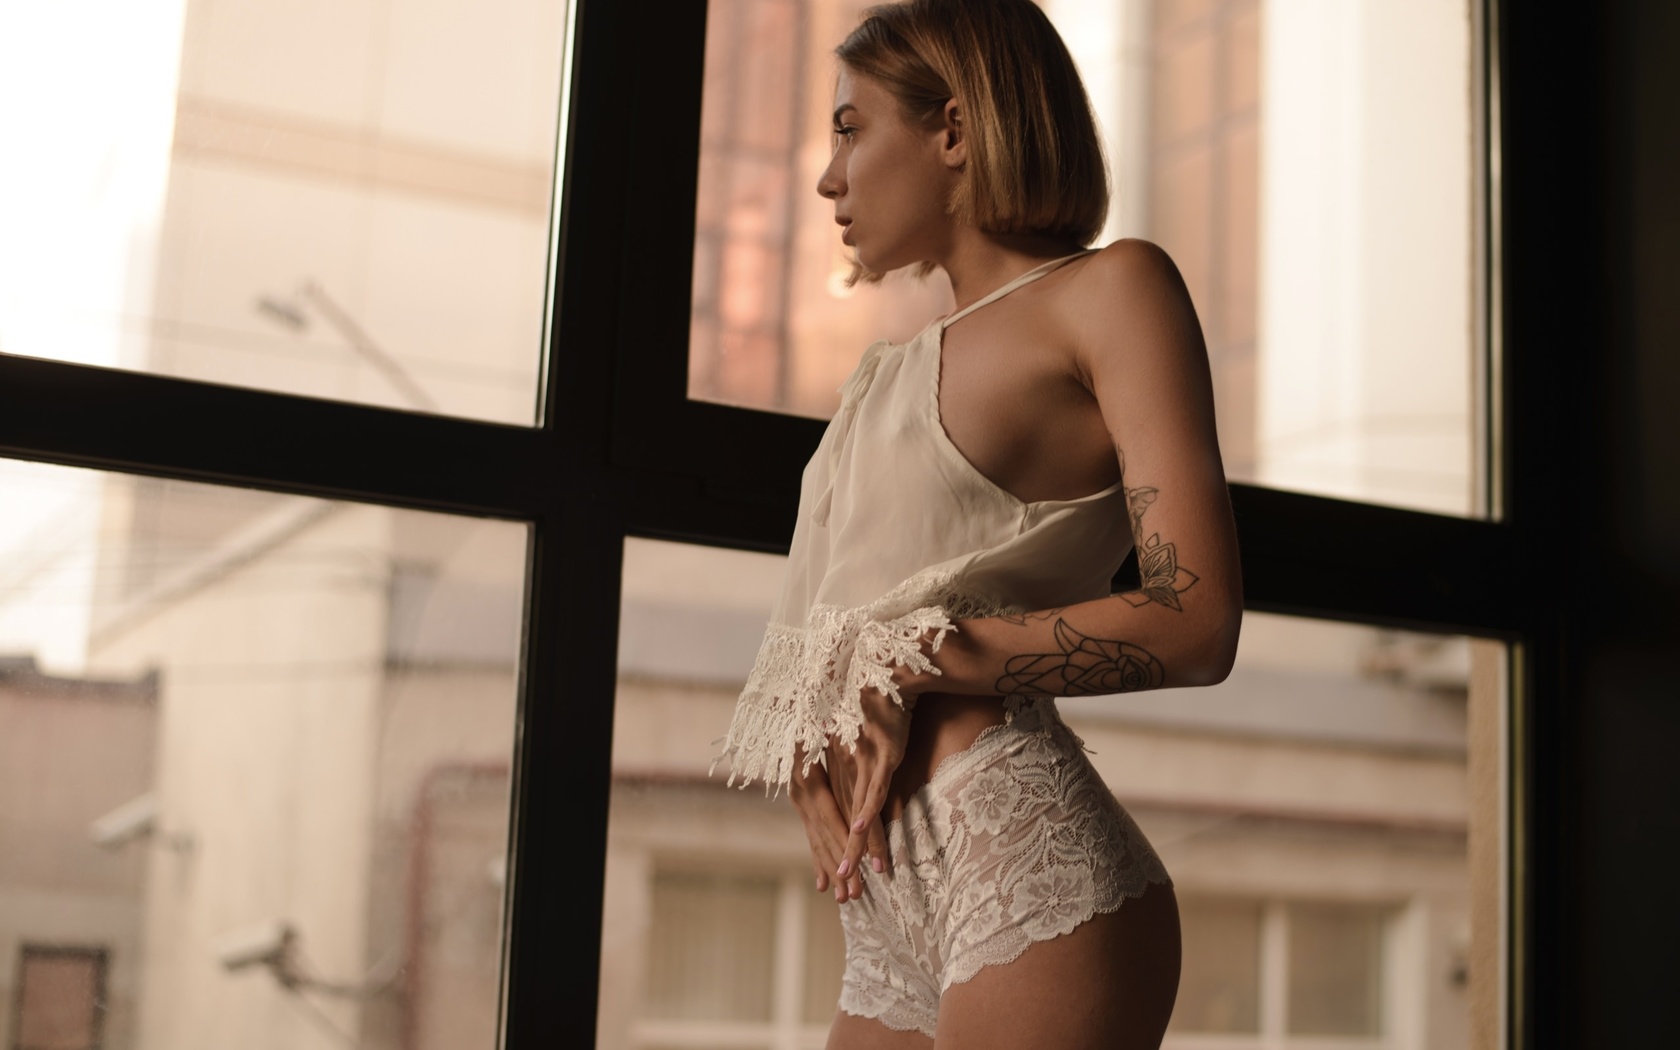 women, blonde, window, ass, tattoo, looking out window, white lingerie, women indoors, pink nails, nipple through clothing